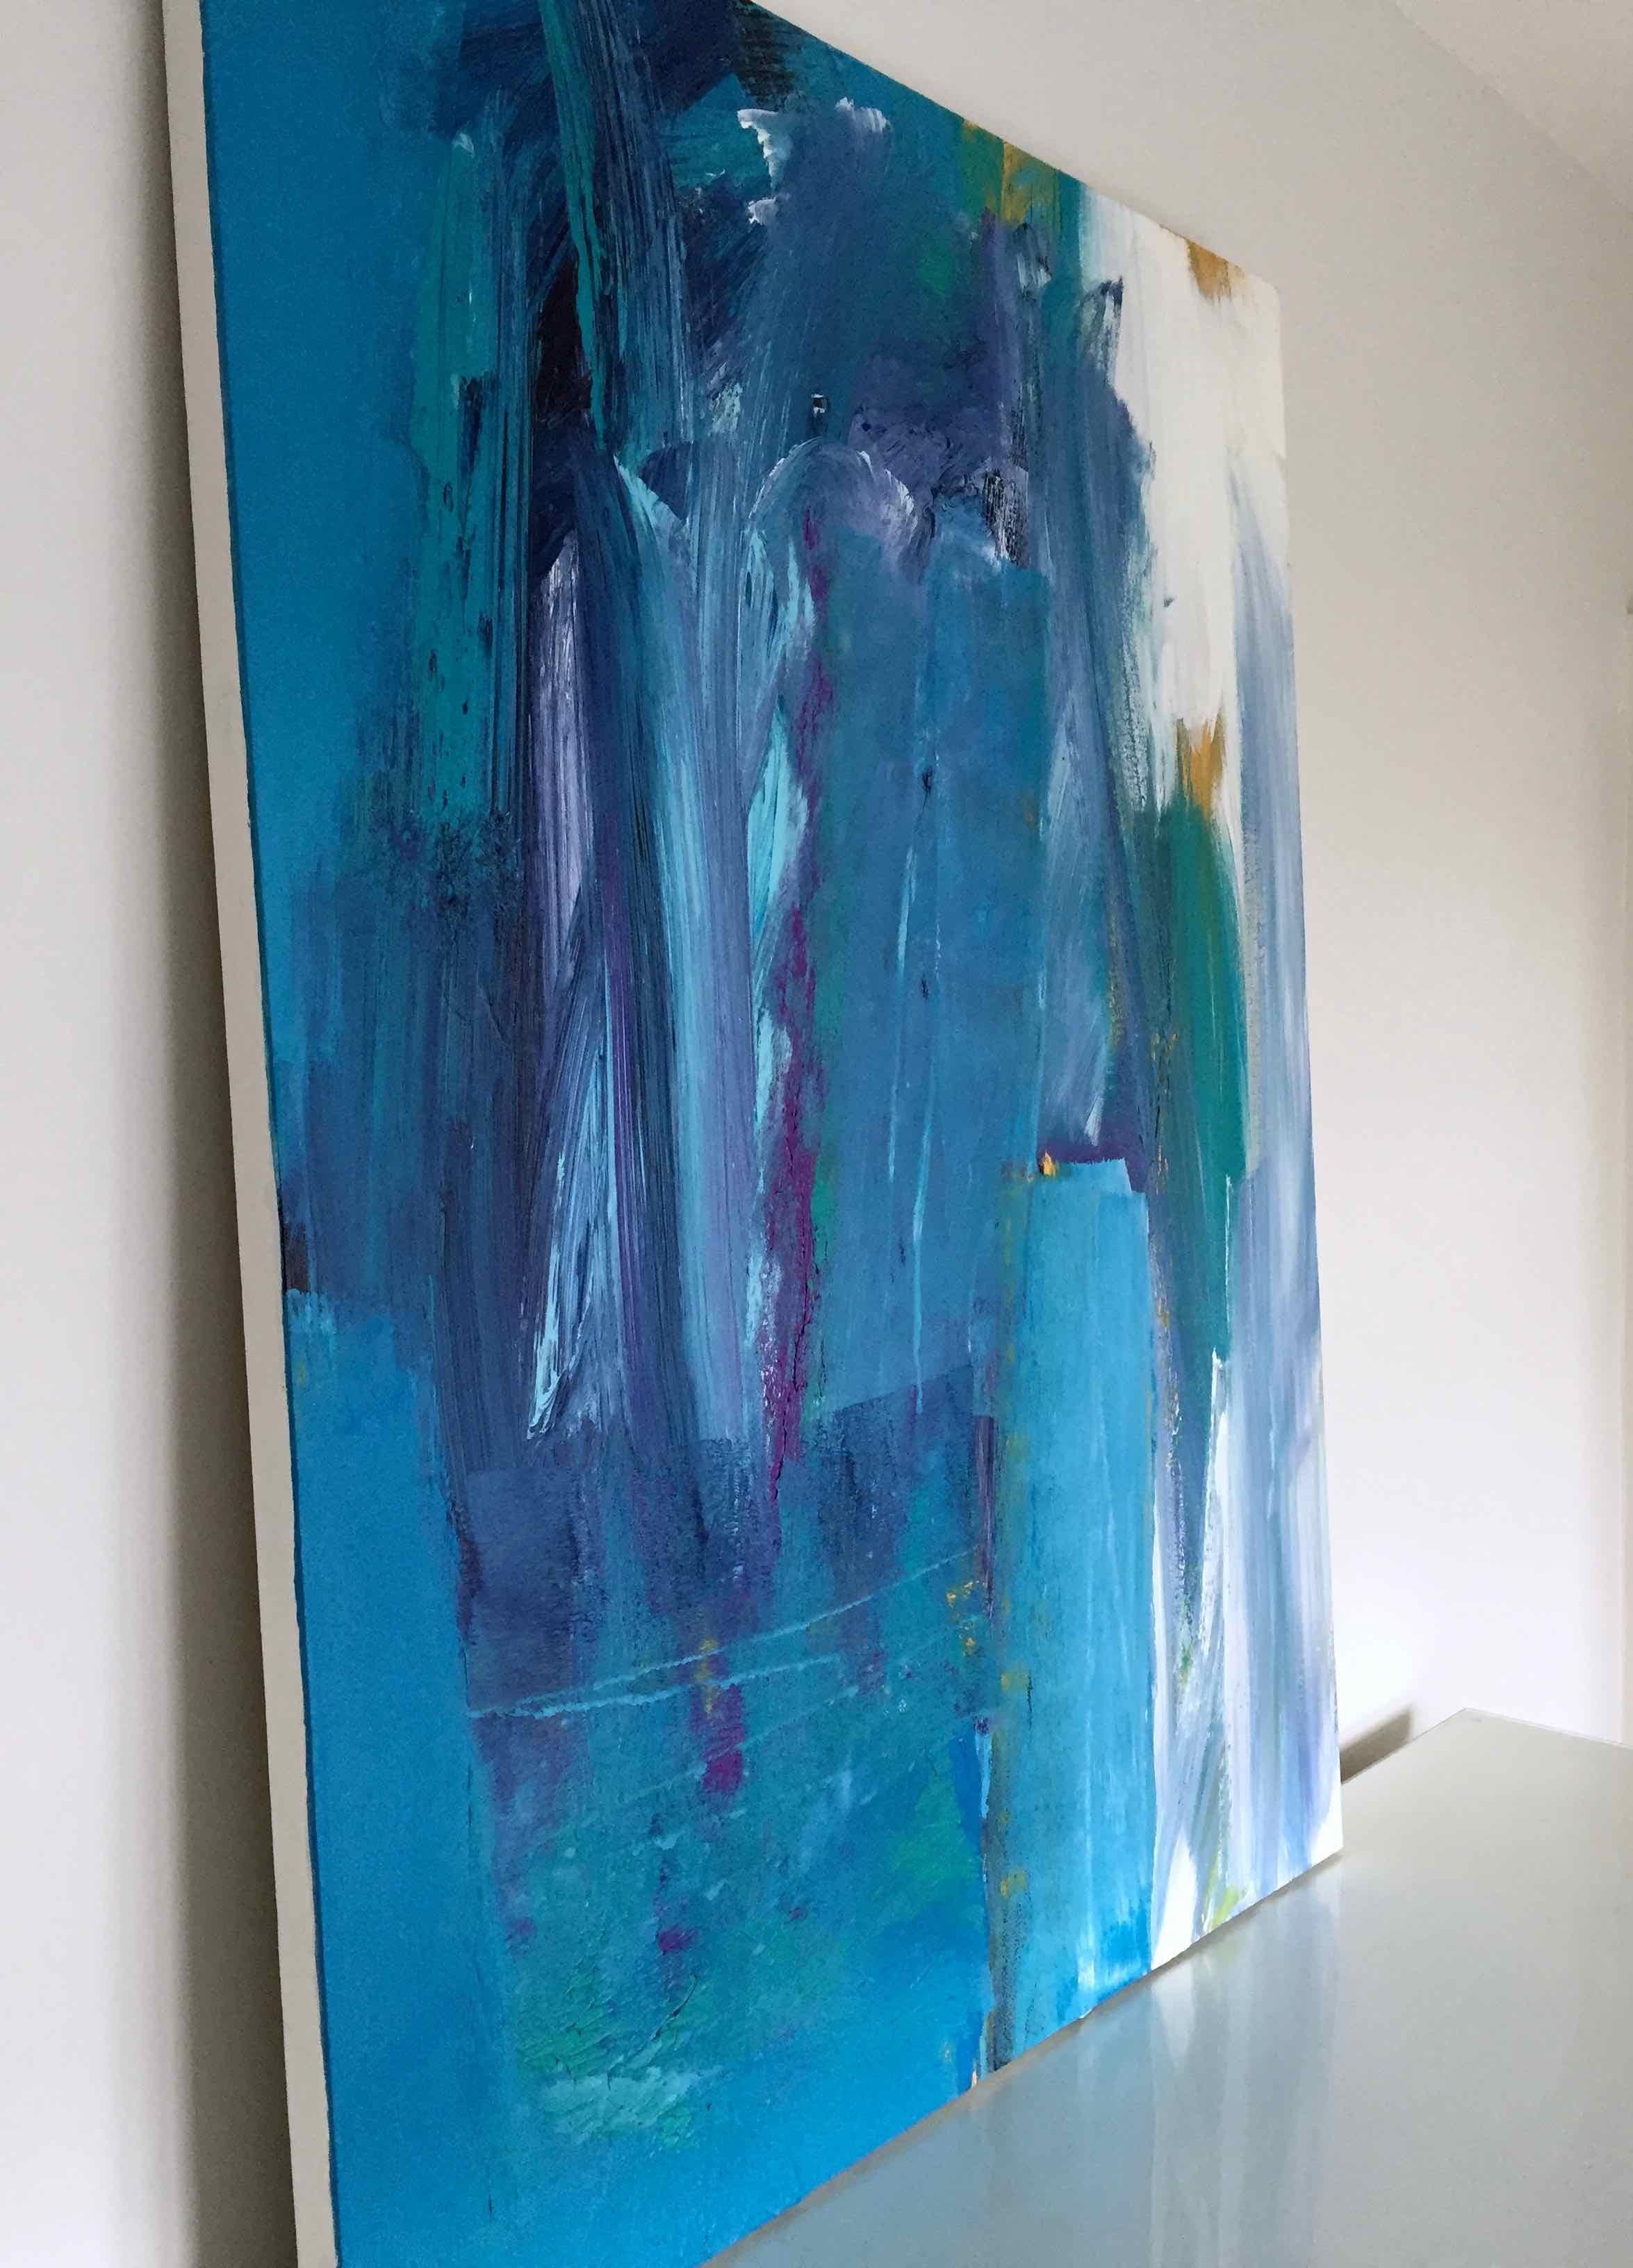 Kew Series I: Large, Abstract, Gestural Painting in Blues and Yellow For Sale 1